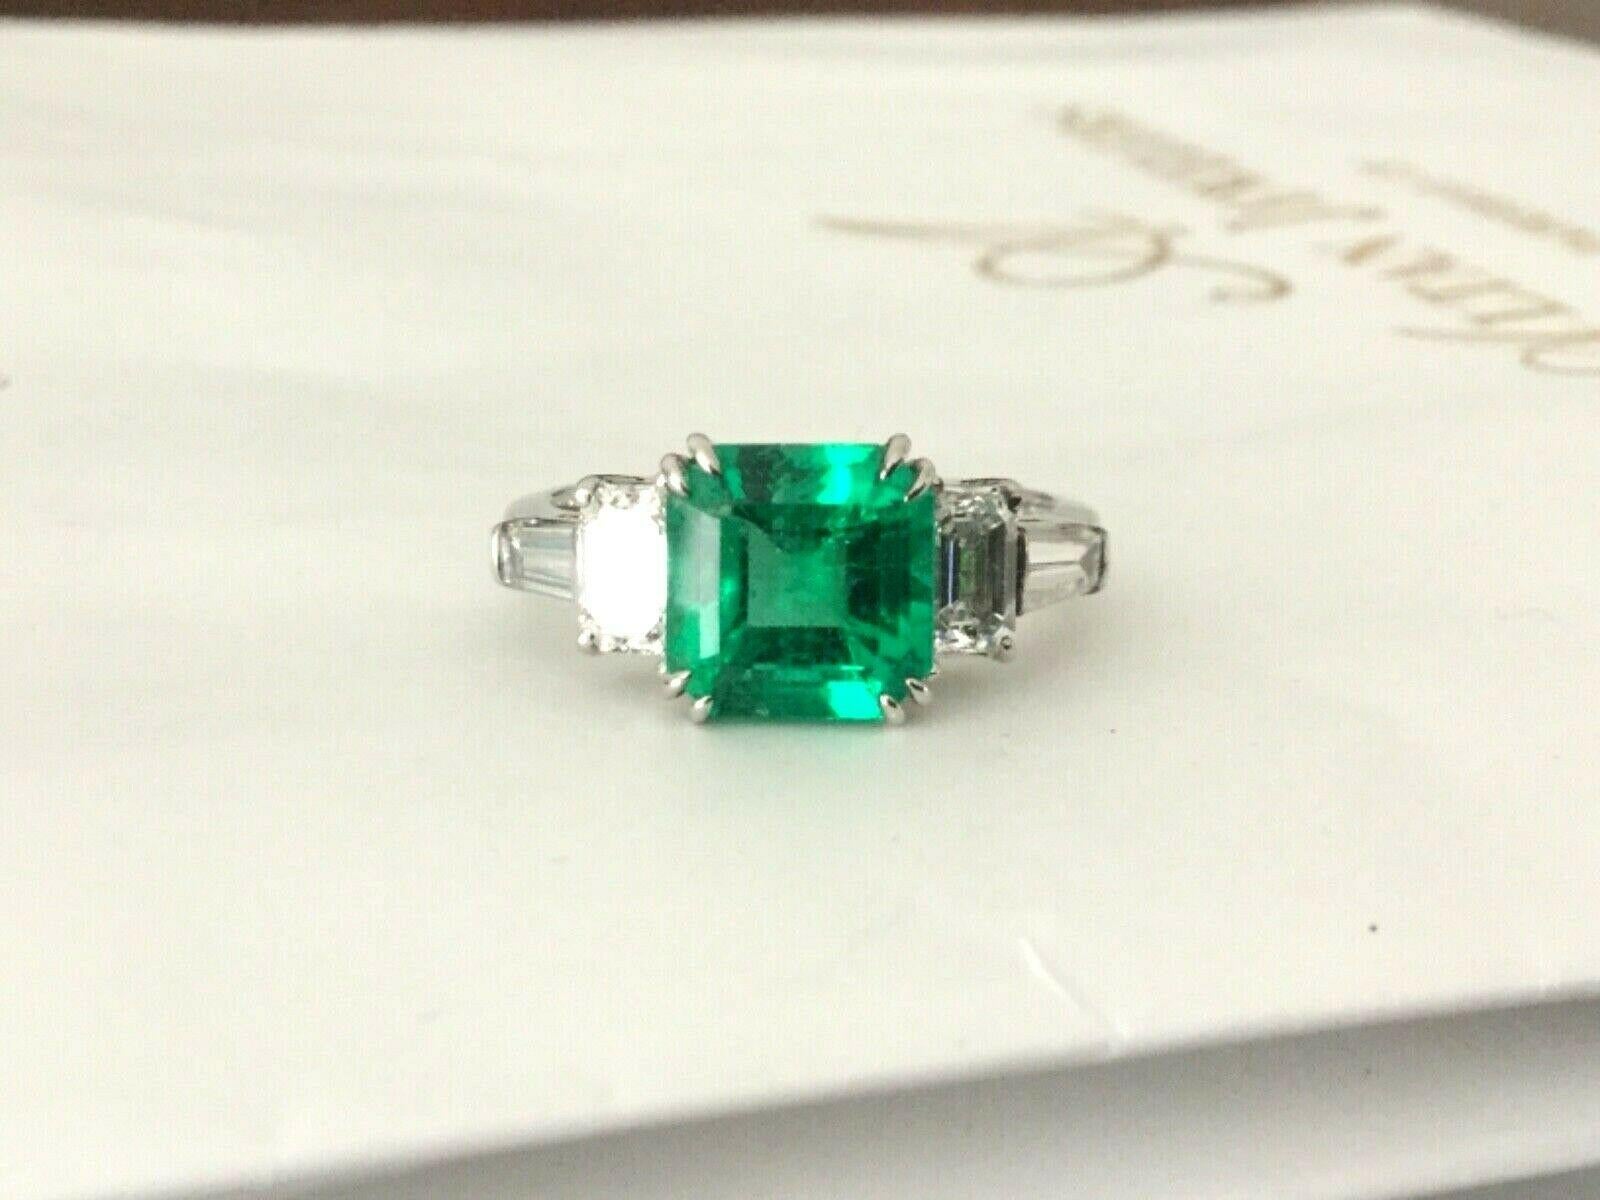 For your consideration is a 2.15 carat octagonal shaped, natural, transparent, green emerald set in a brand new 14k white gold setting with 1.00 carats of natural G color VS clarity white diamonds.  The unheated emerald is GIA certified and is super